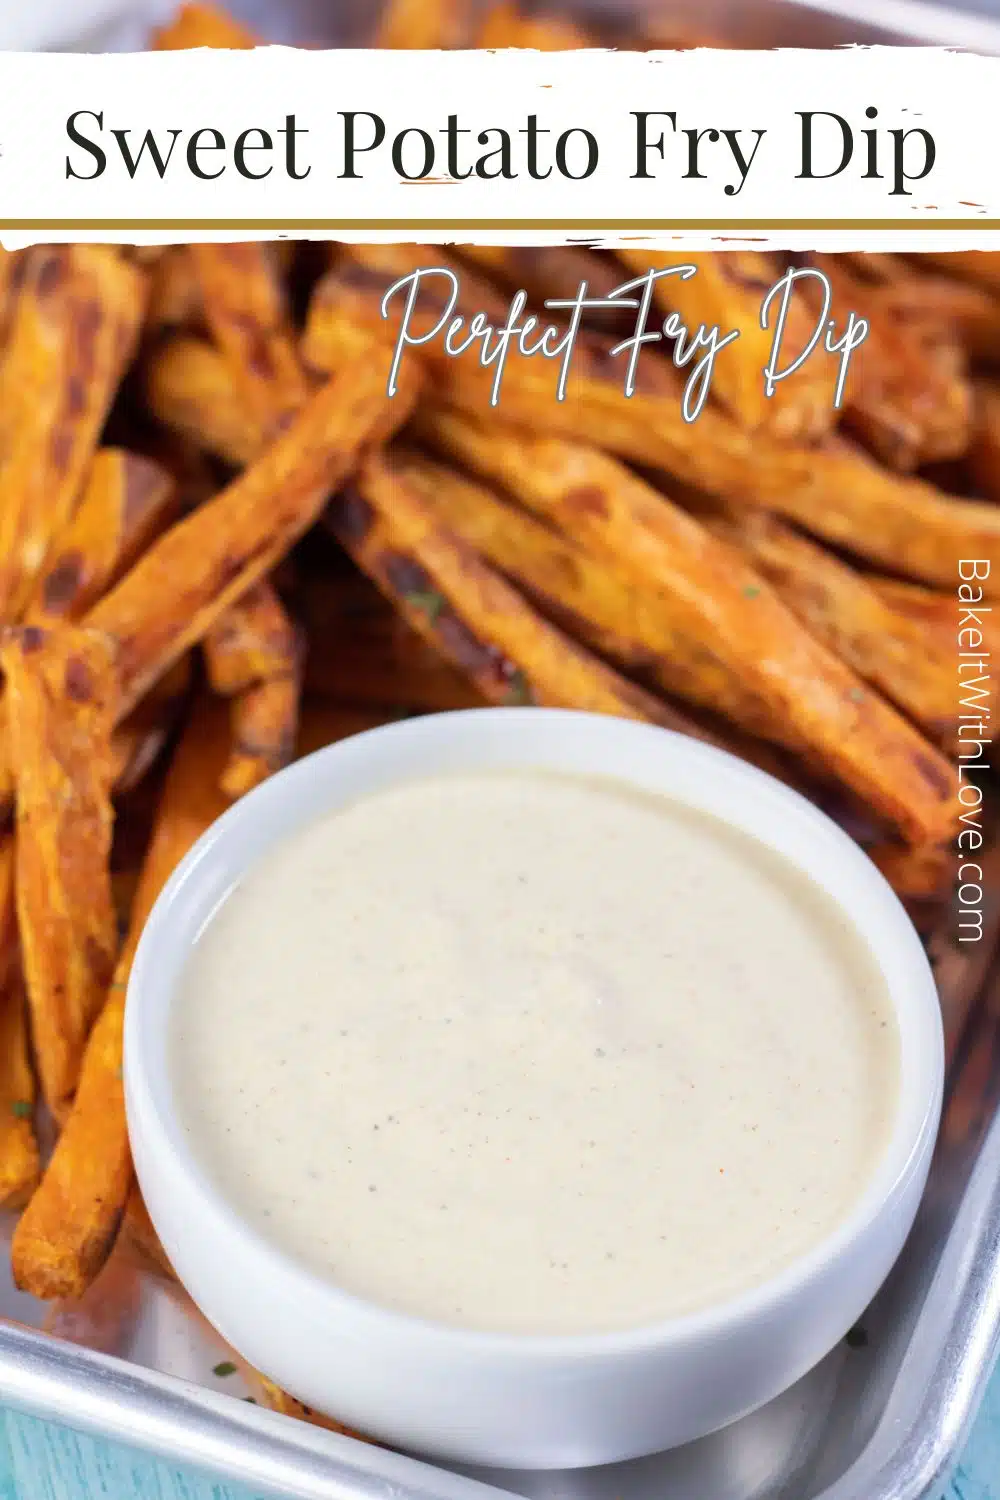 Pin image with text showing sweet potato fry dip.